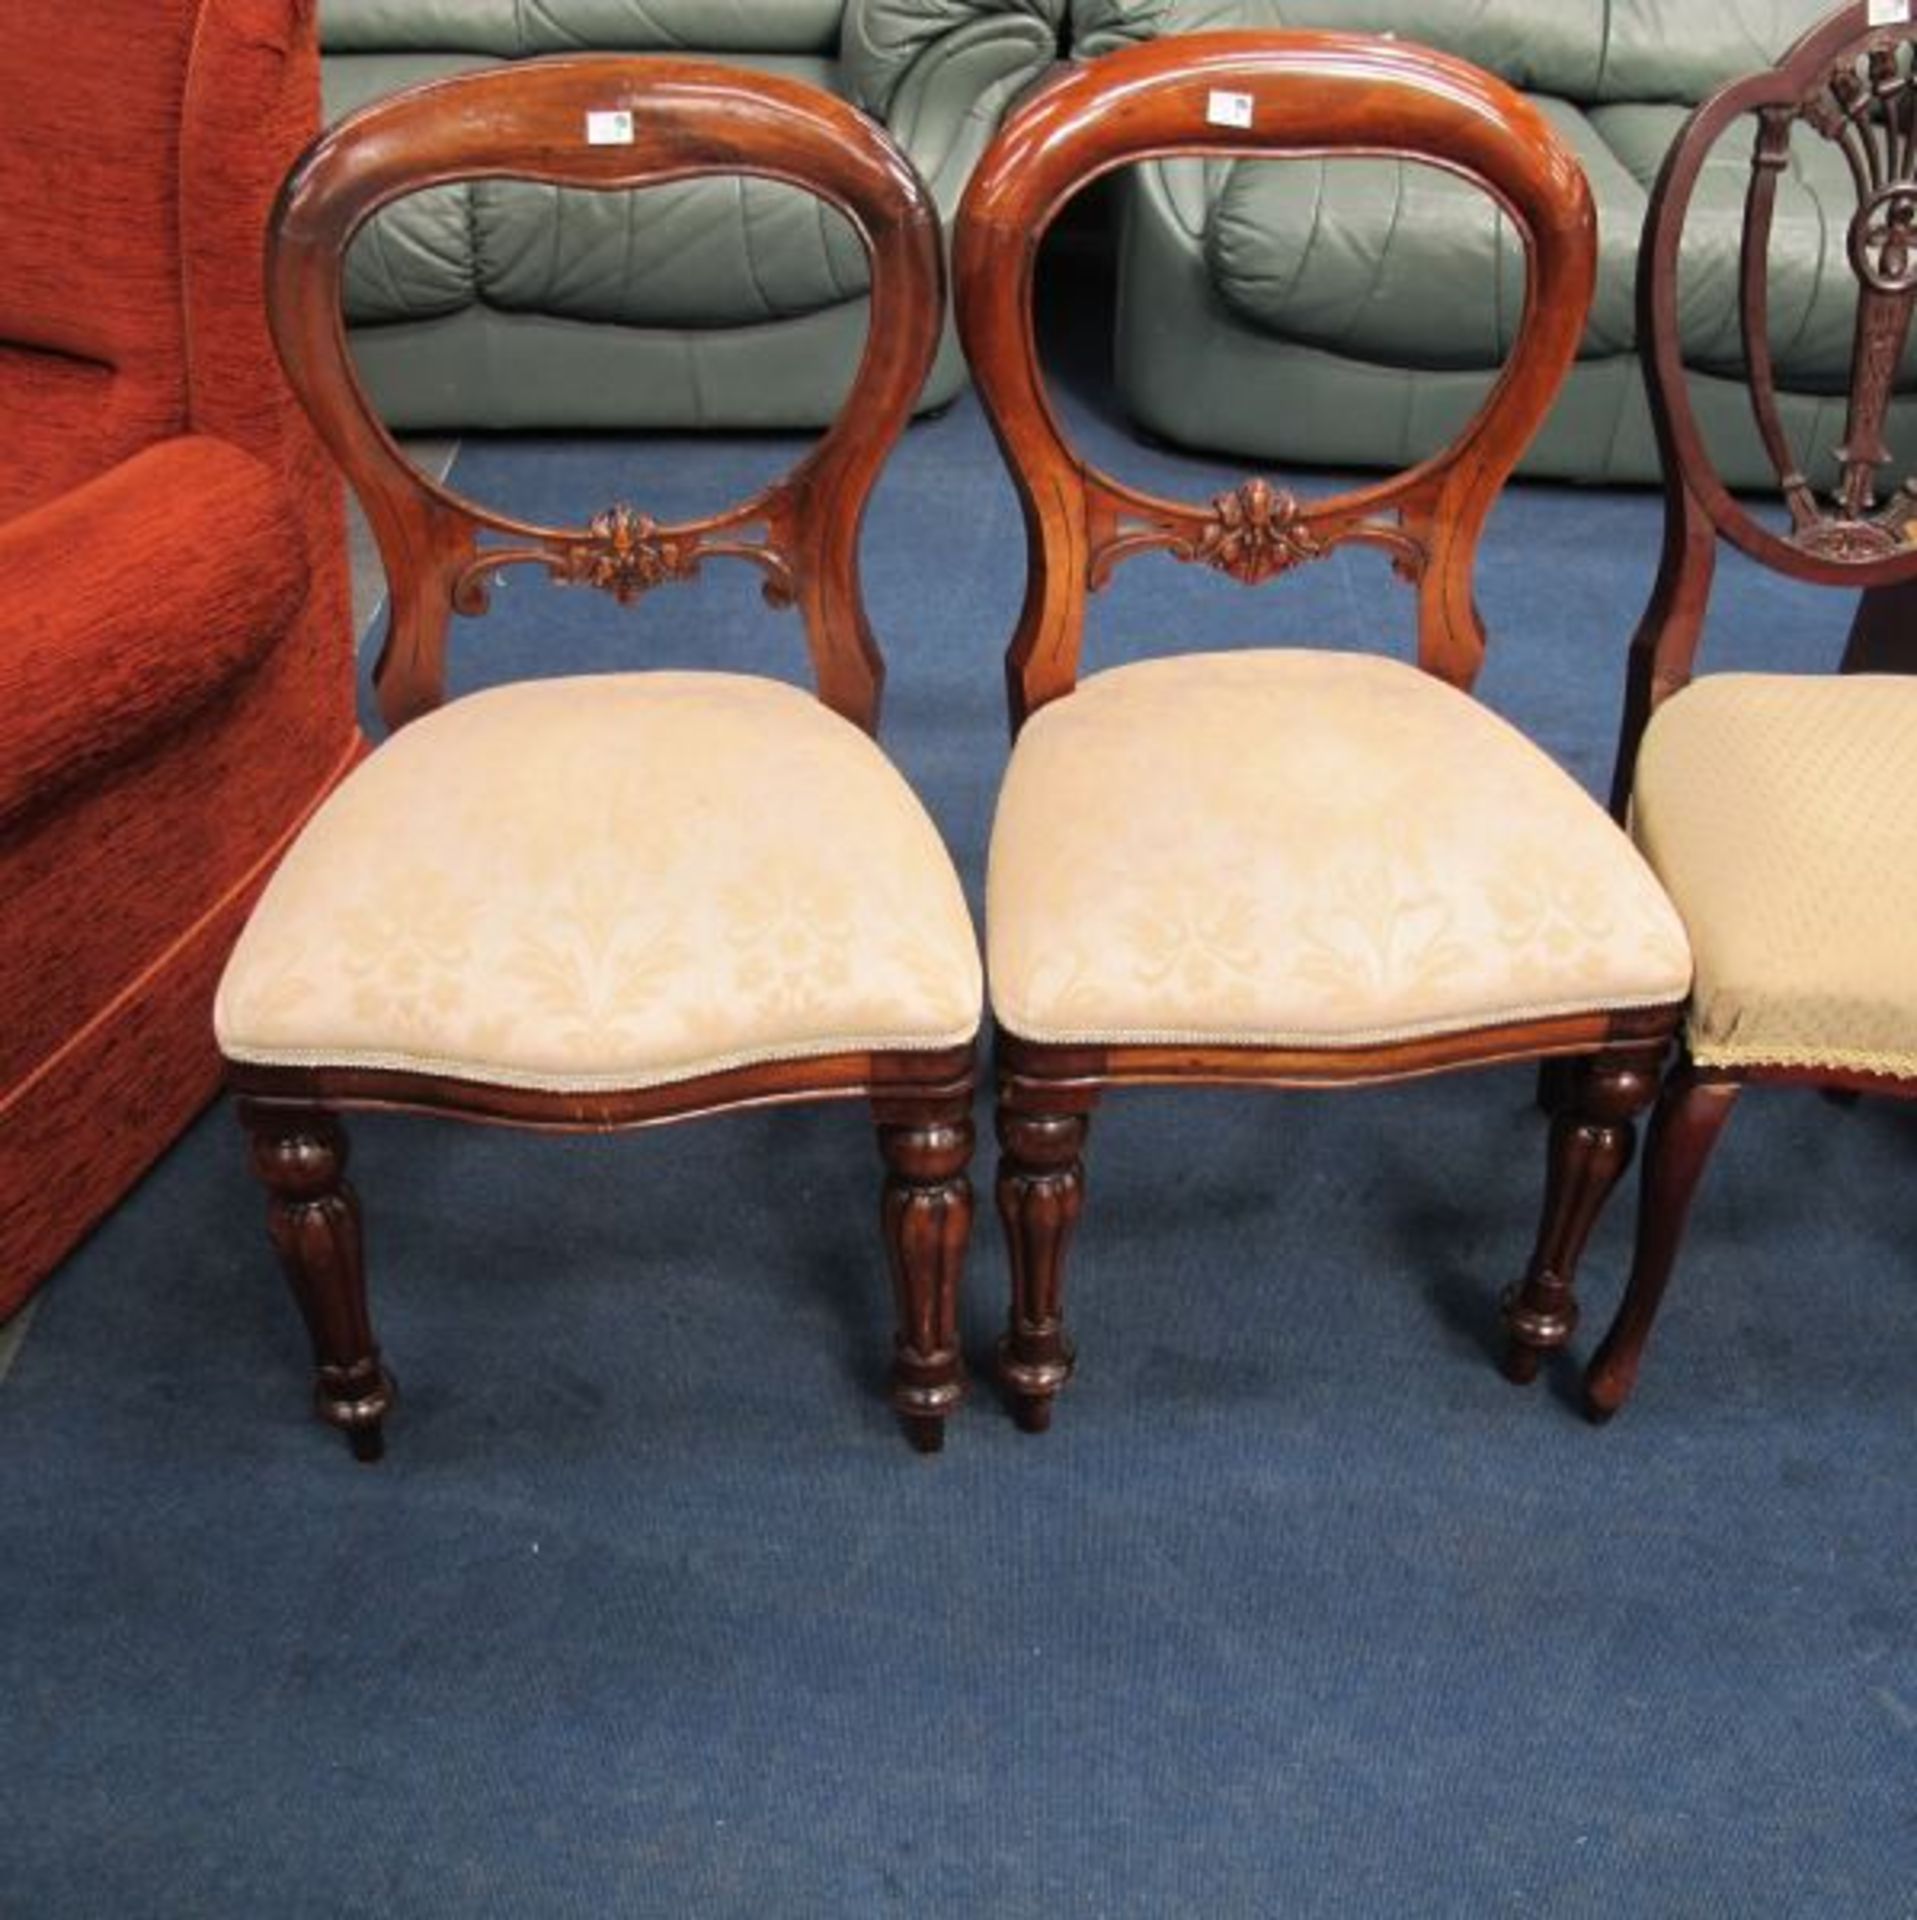 Edwardian Inlaid Rosewood Single Chair; Oval Back Single Chair and a Pair of Victorian Style Balloon